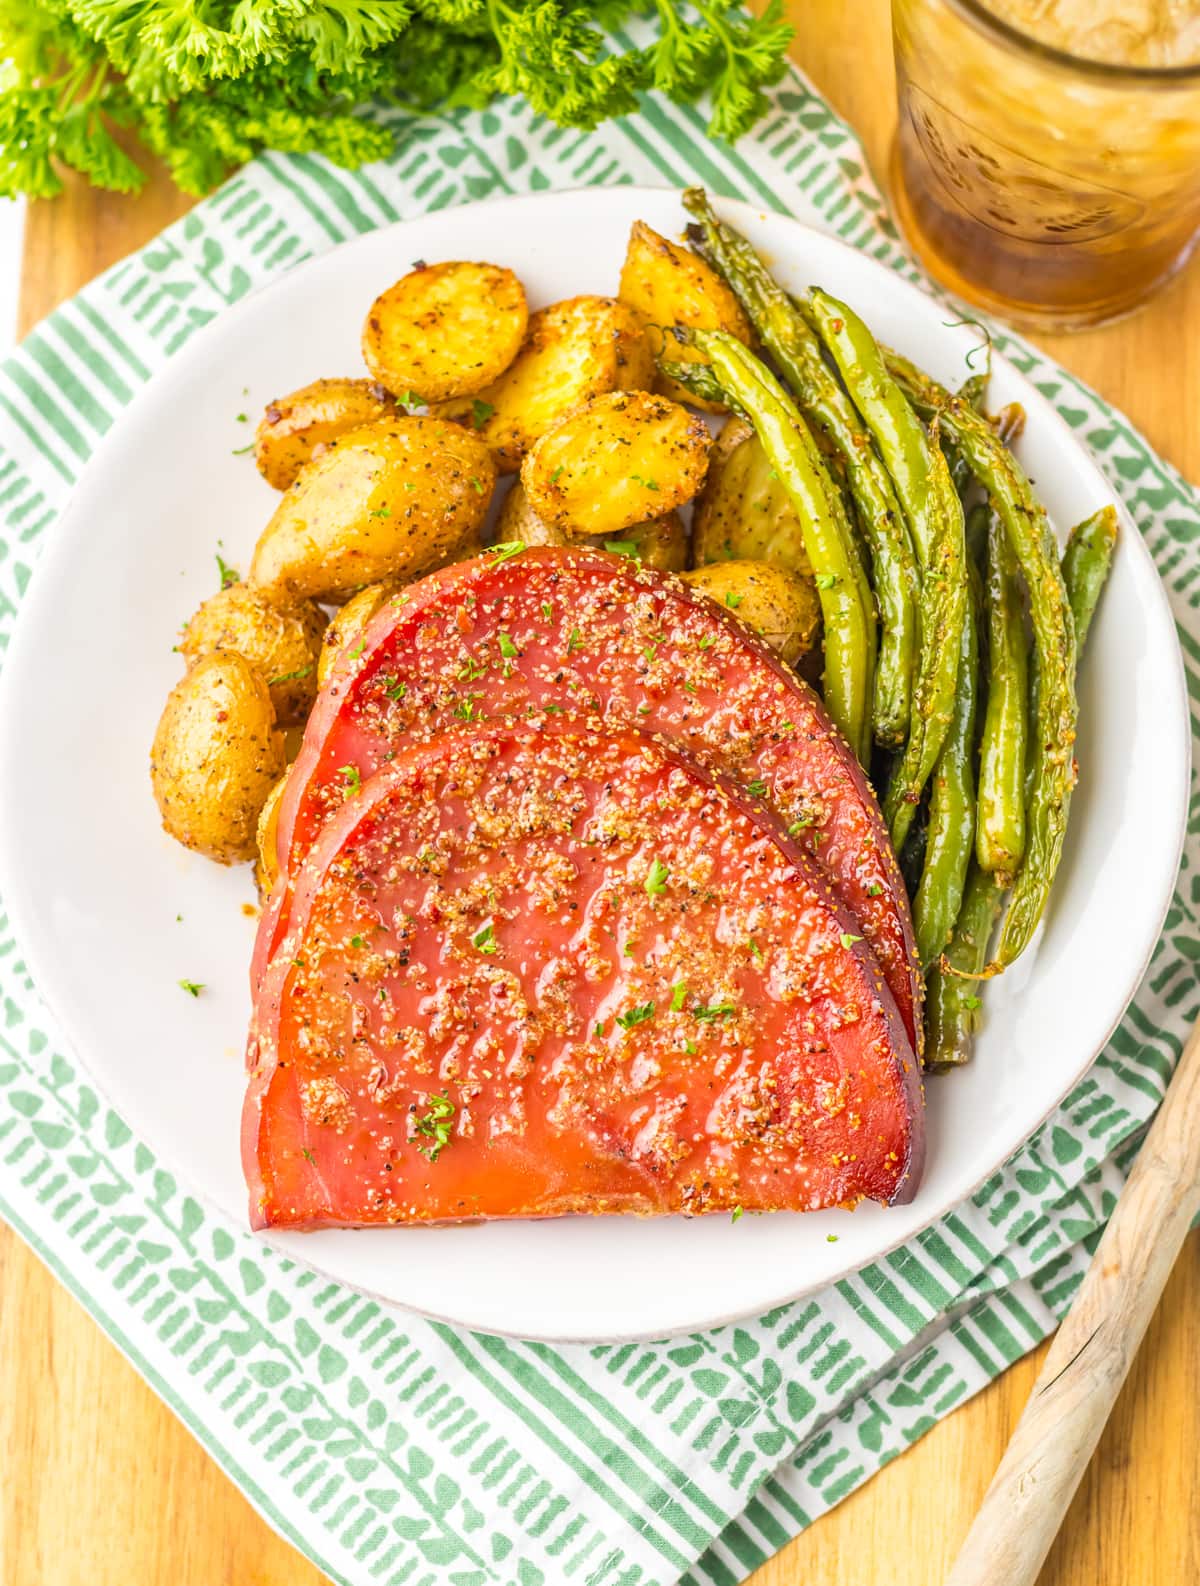 Ham steak with roasted potatoes and green beans on a white plate.